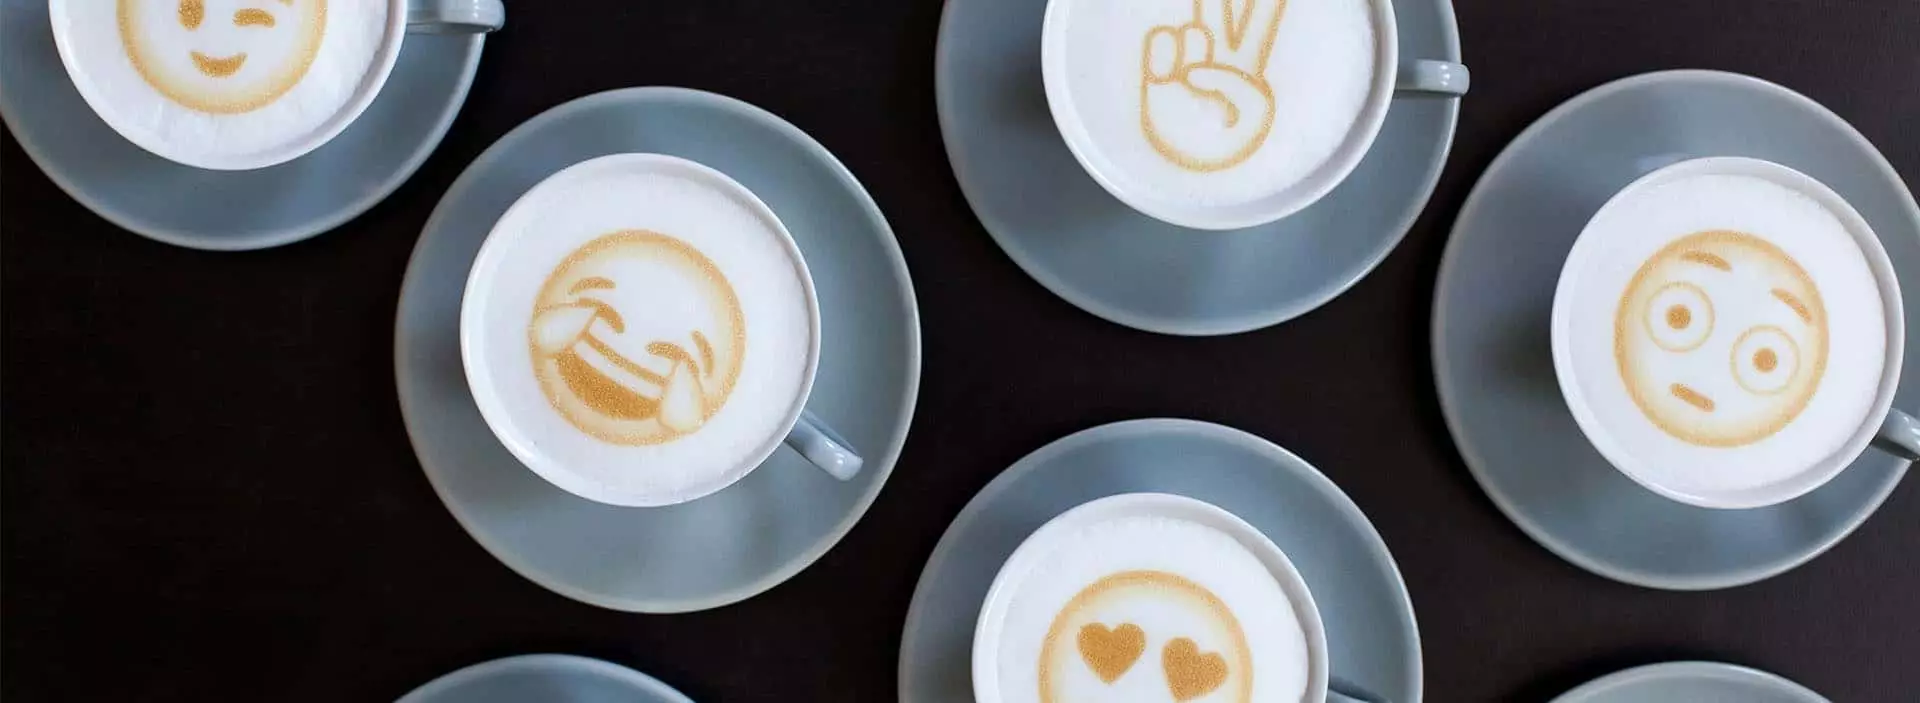 10 of the most beautiful lattes from around the US